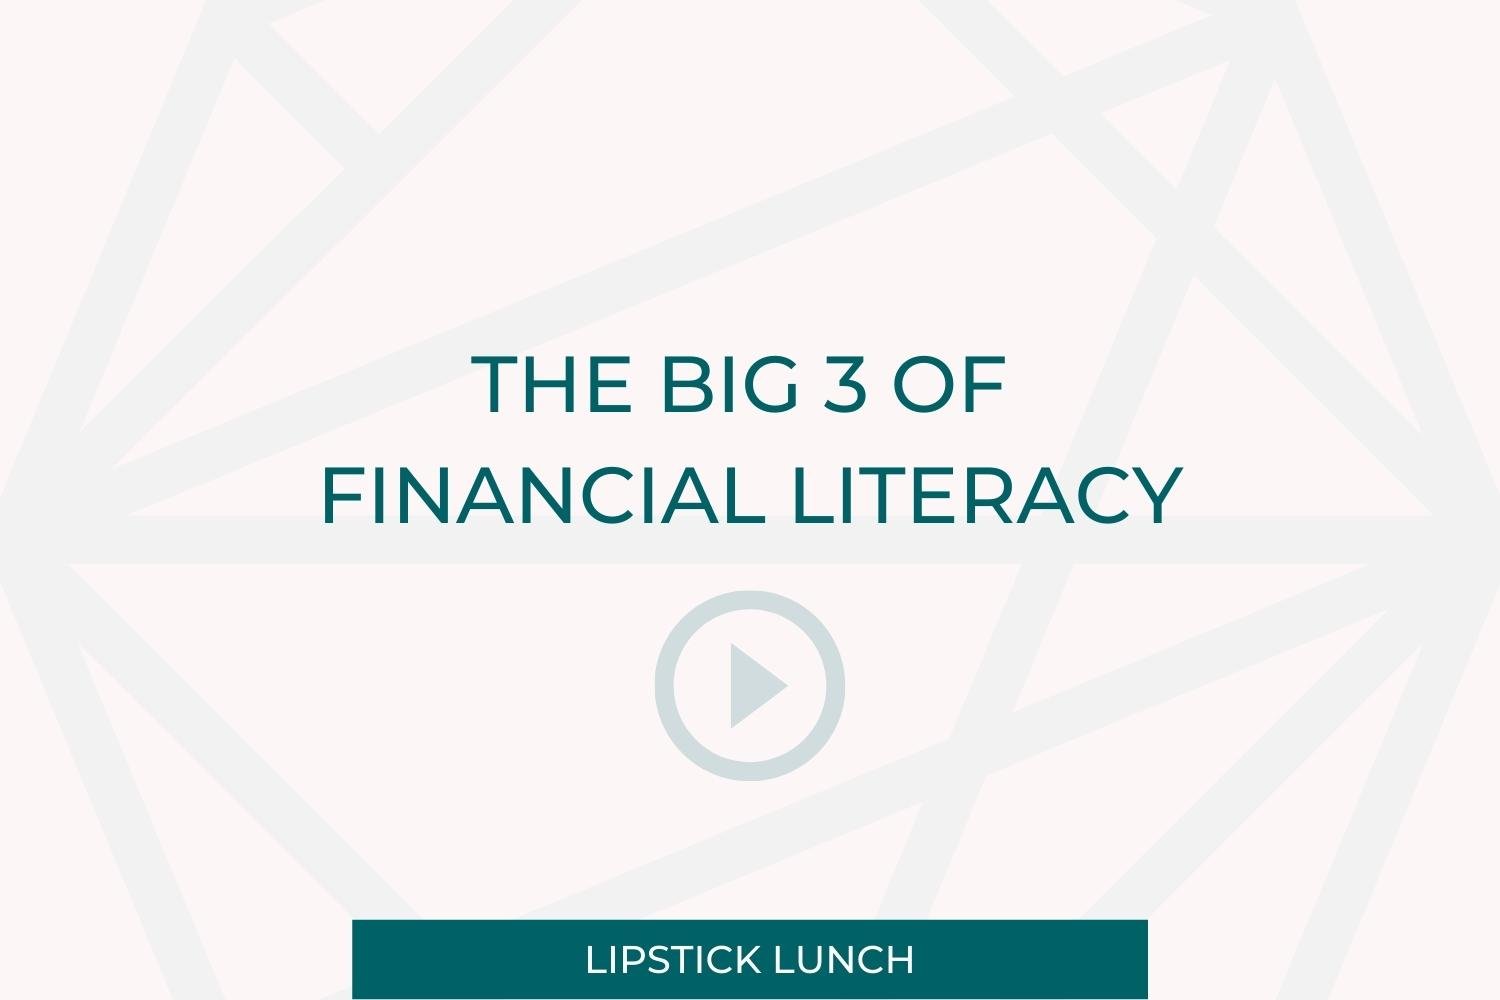 The Big 3 of Financial Literacy.